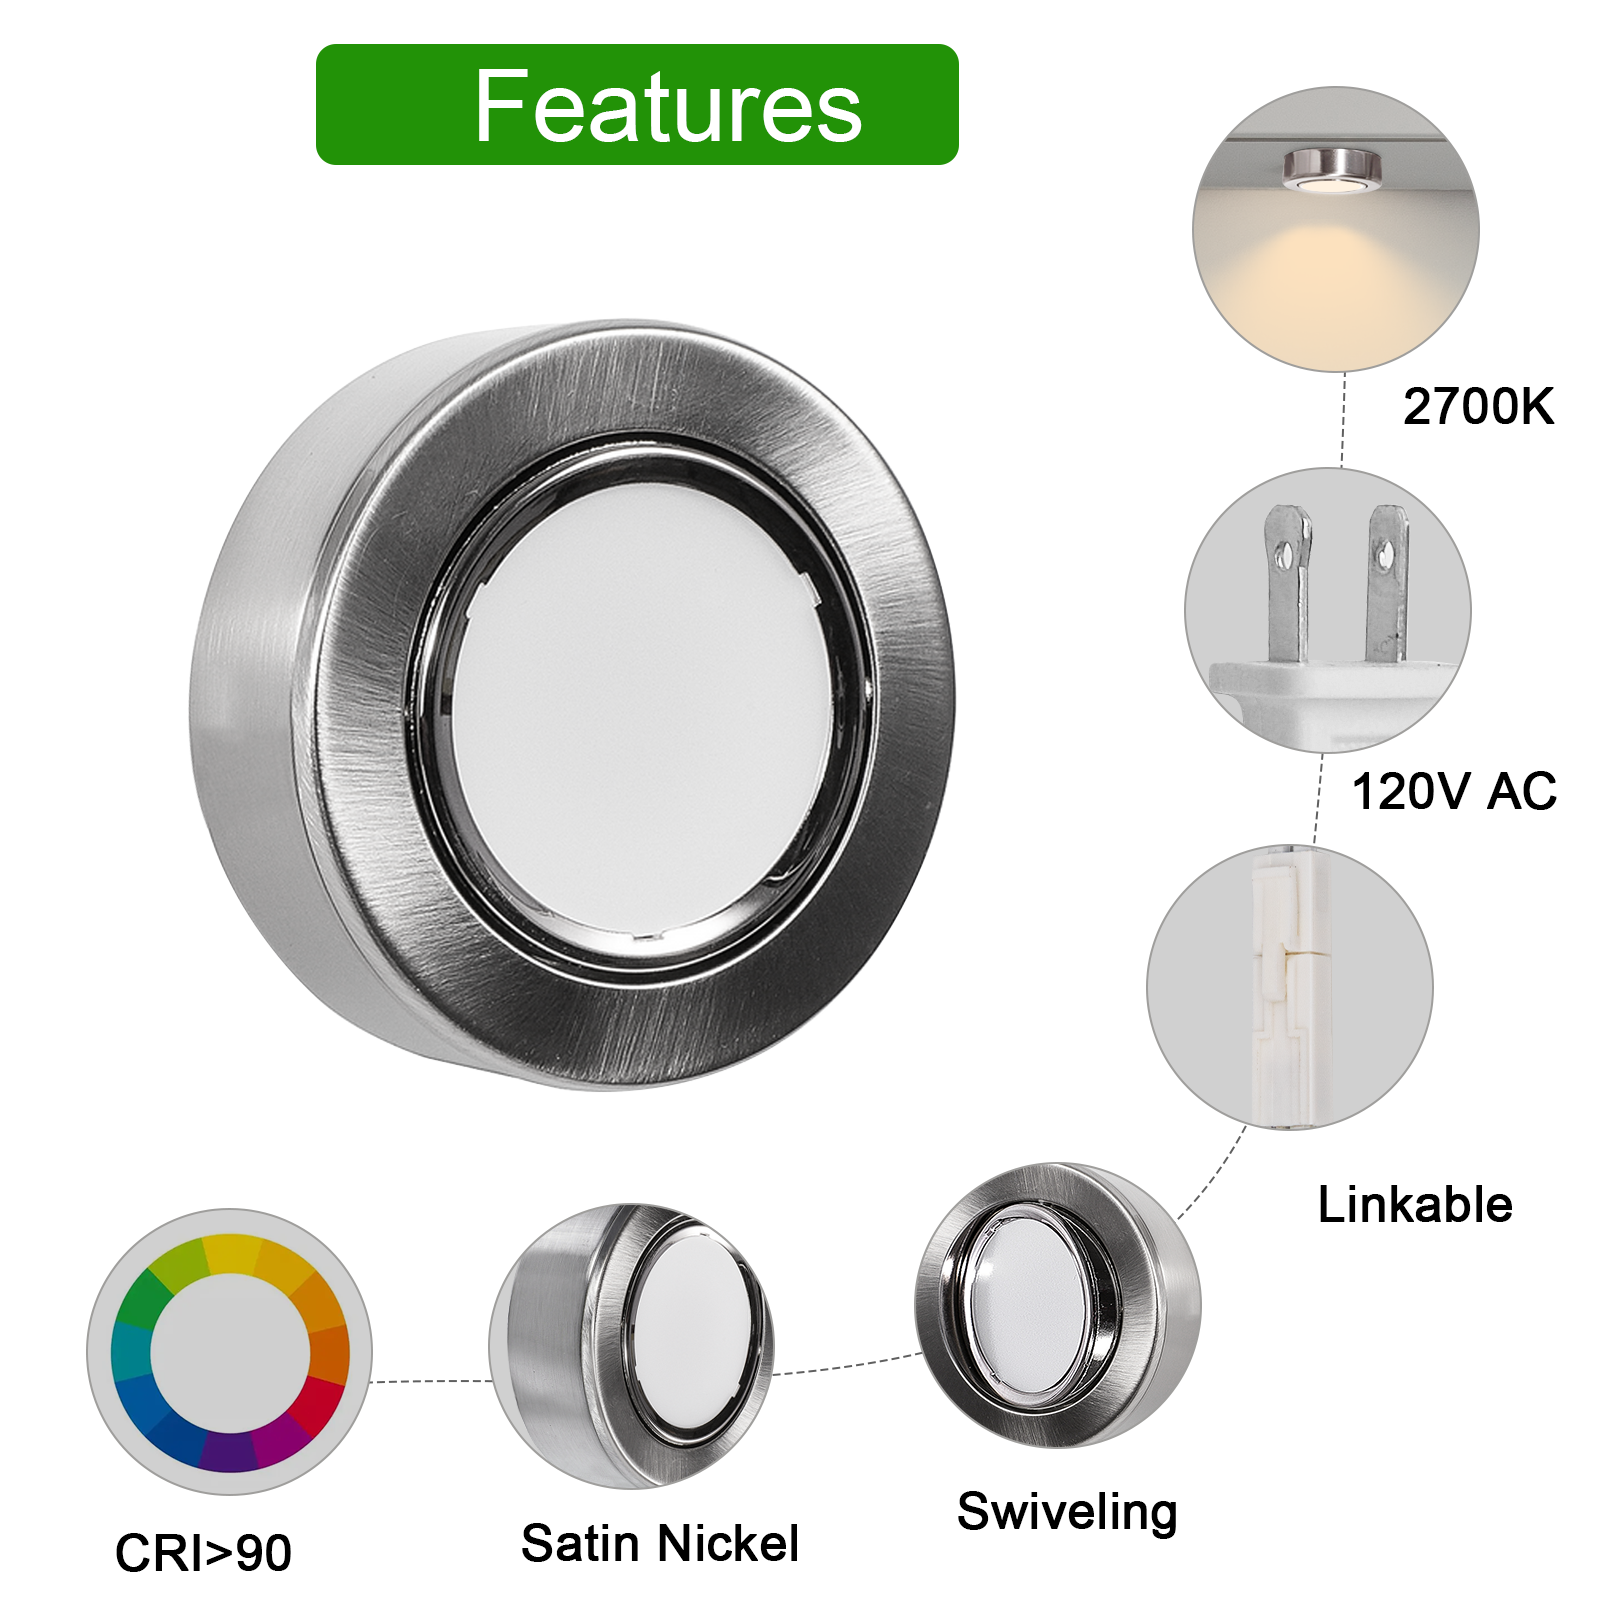 AIBOO Swivel Puck Lights, Linkable LED Puck Lights Wired 120V with Plug-in, Satin Nickel Finished Under Counter Lights Surface Mounted for Cabinet, Closet, Wardrobe (Warm White 2700K, 3 Pack)